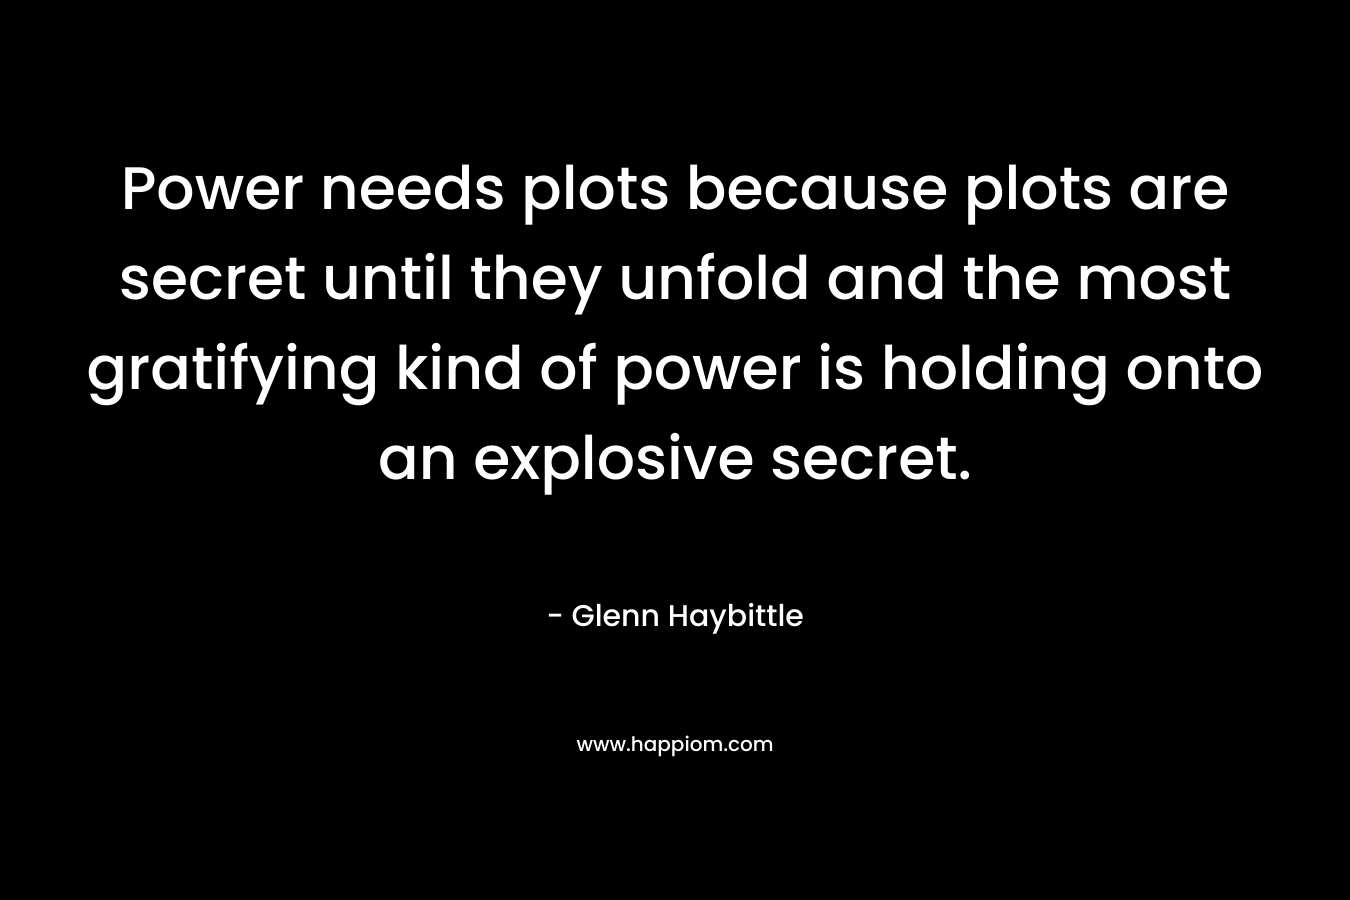 Power needs plots because plots are secret until they unfold and the most gratifying kind of power is holding onto an explosive secret. – Glenn Haybittle